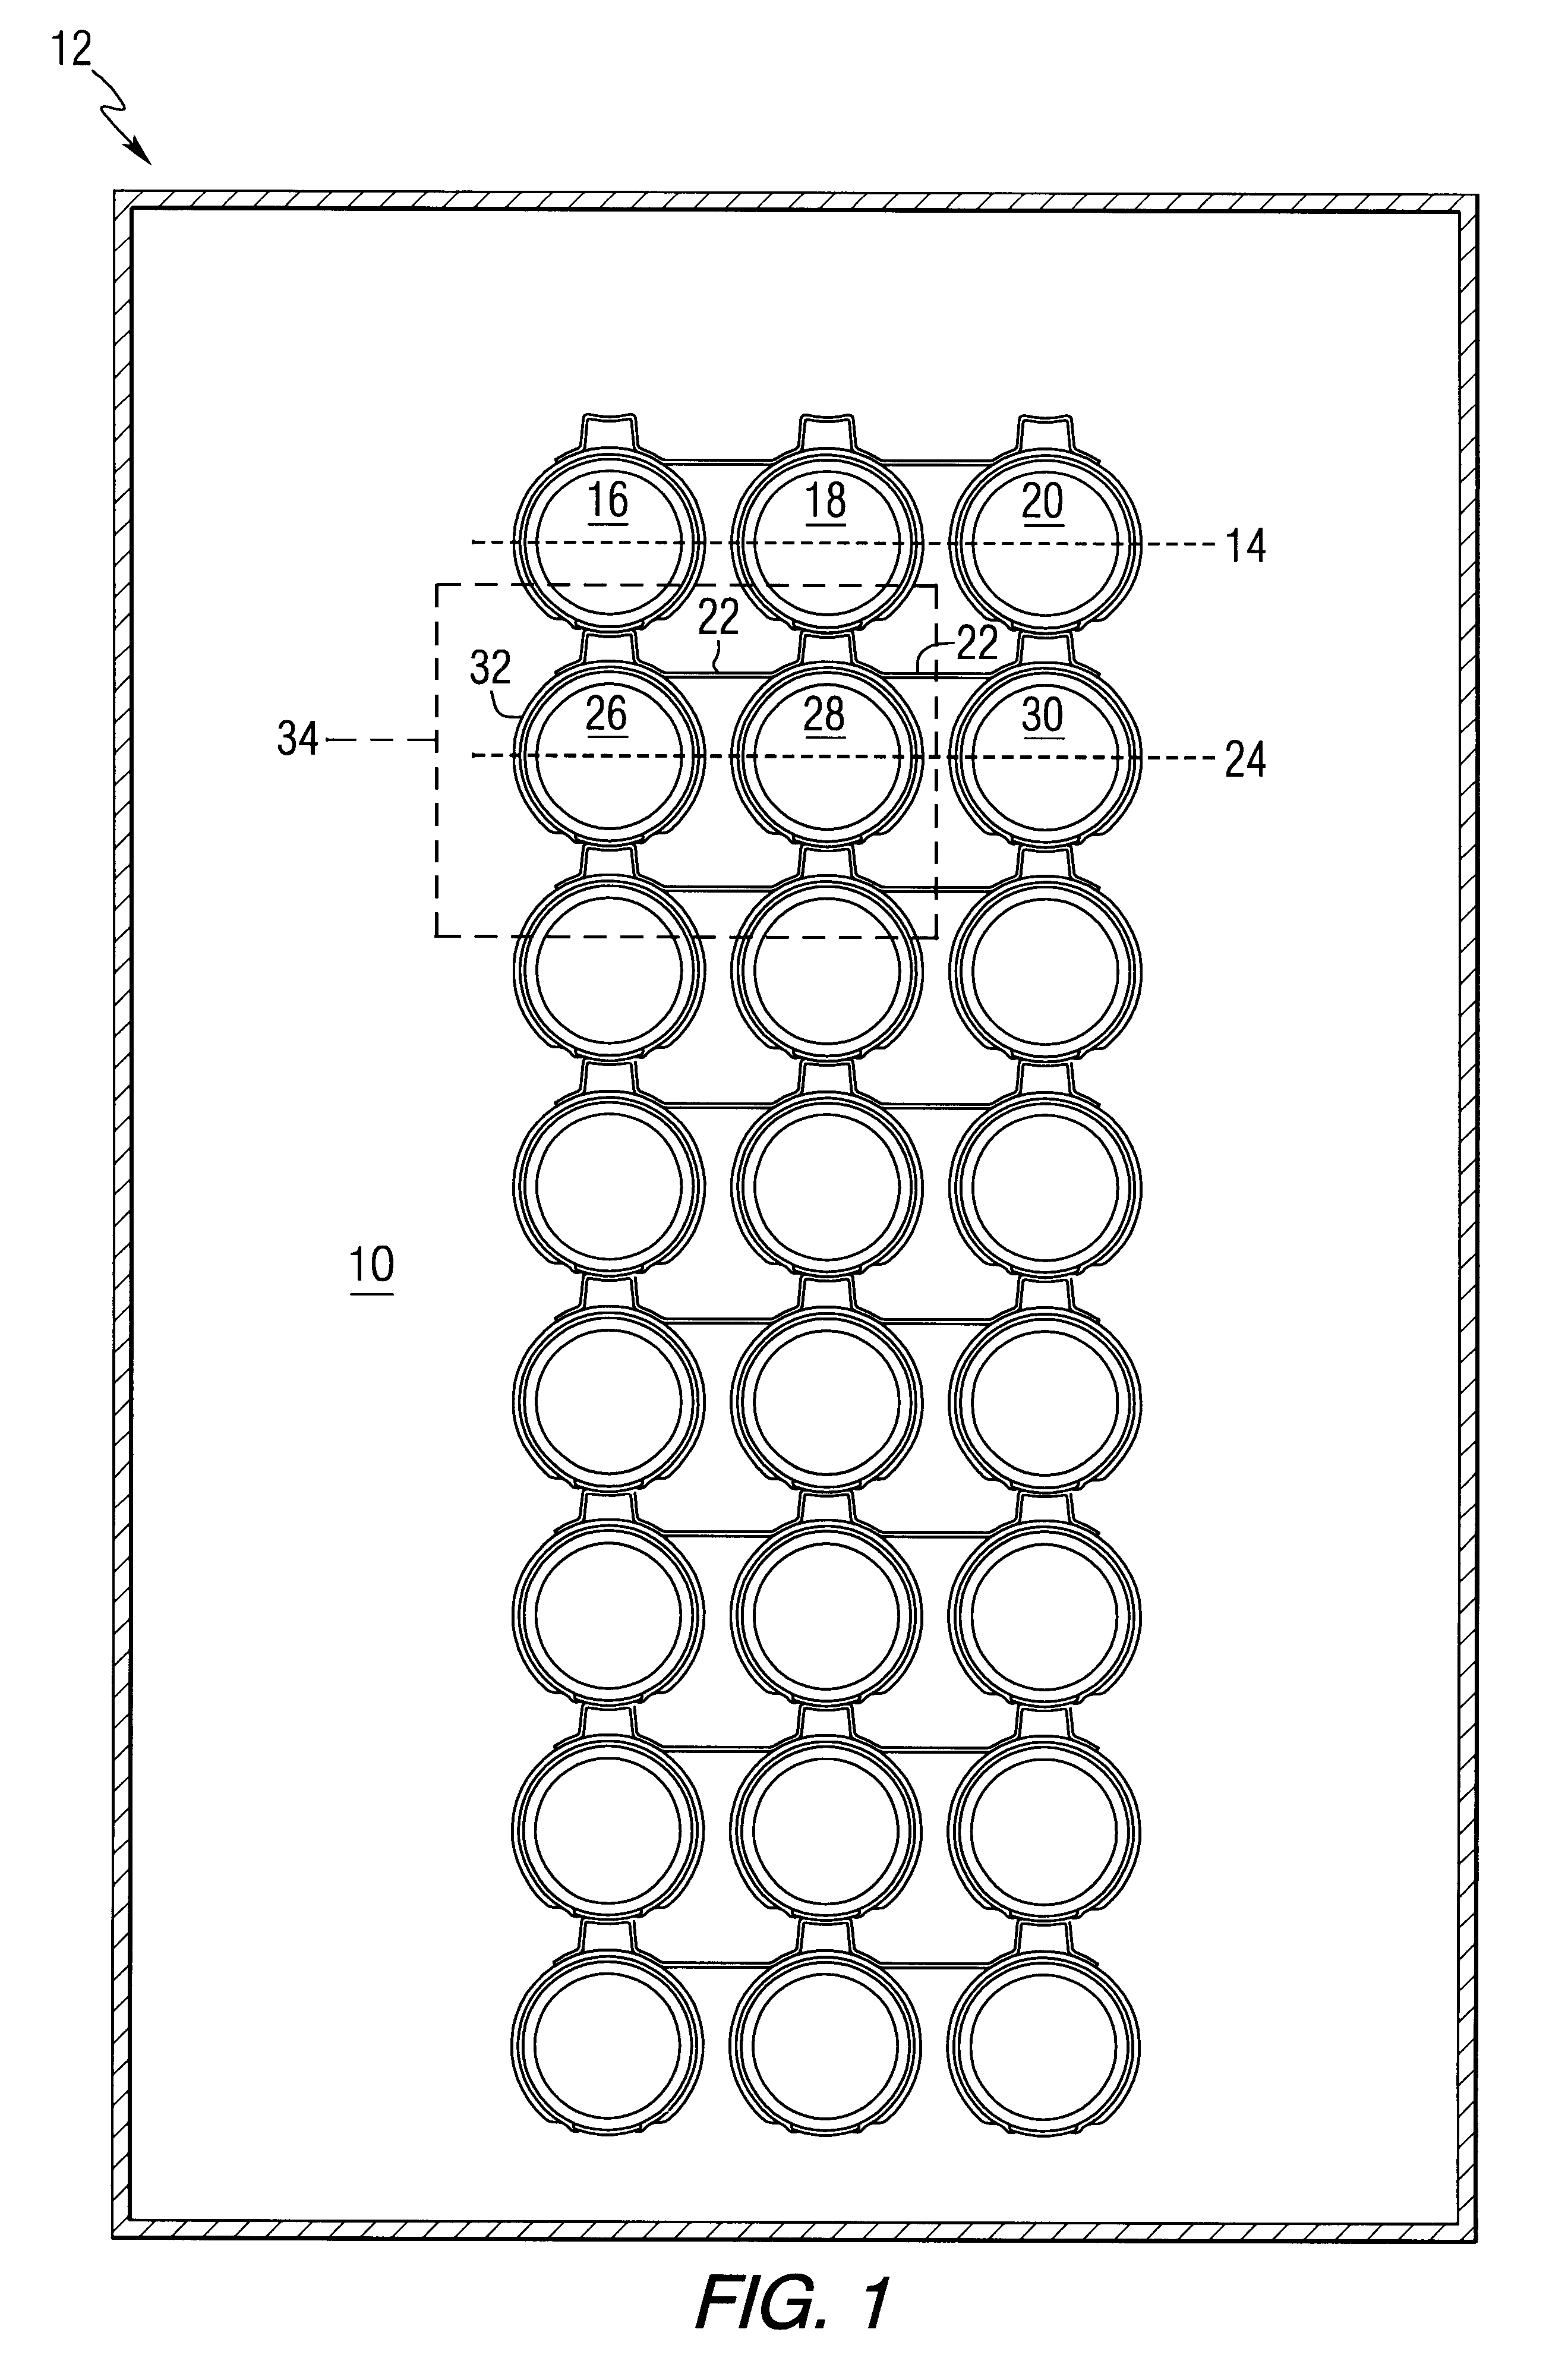 Expanded nickel screen electrical connection supports for solid oxide fuel cells